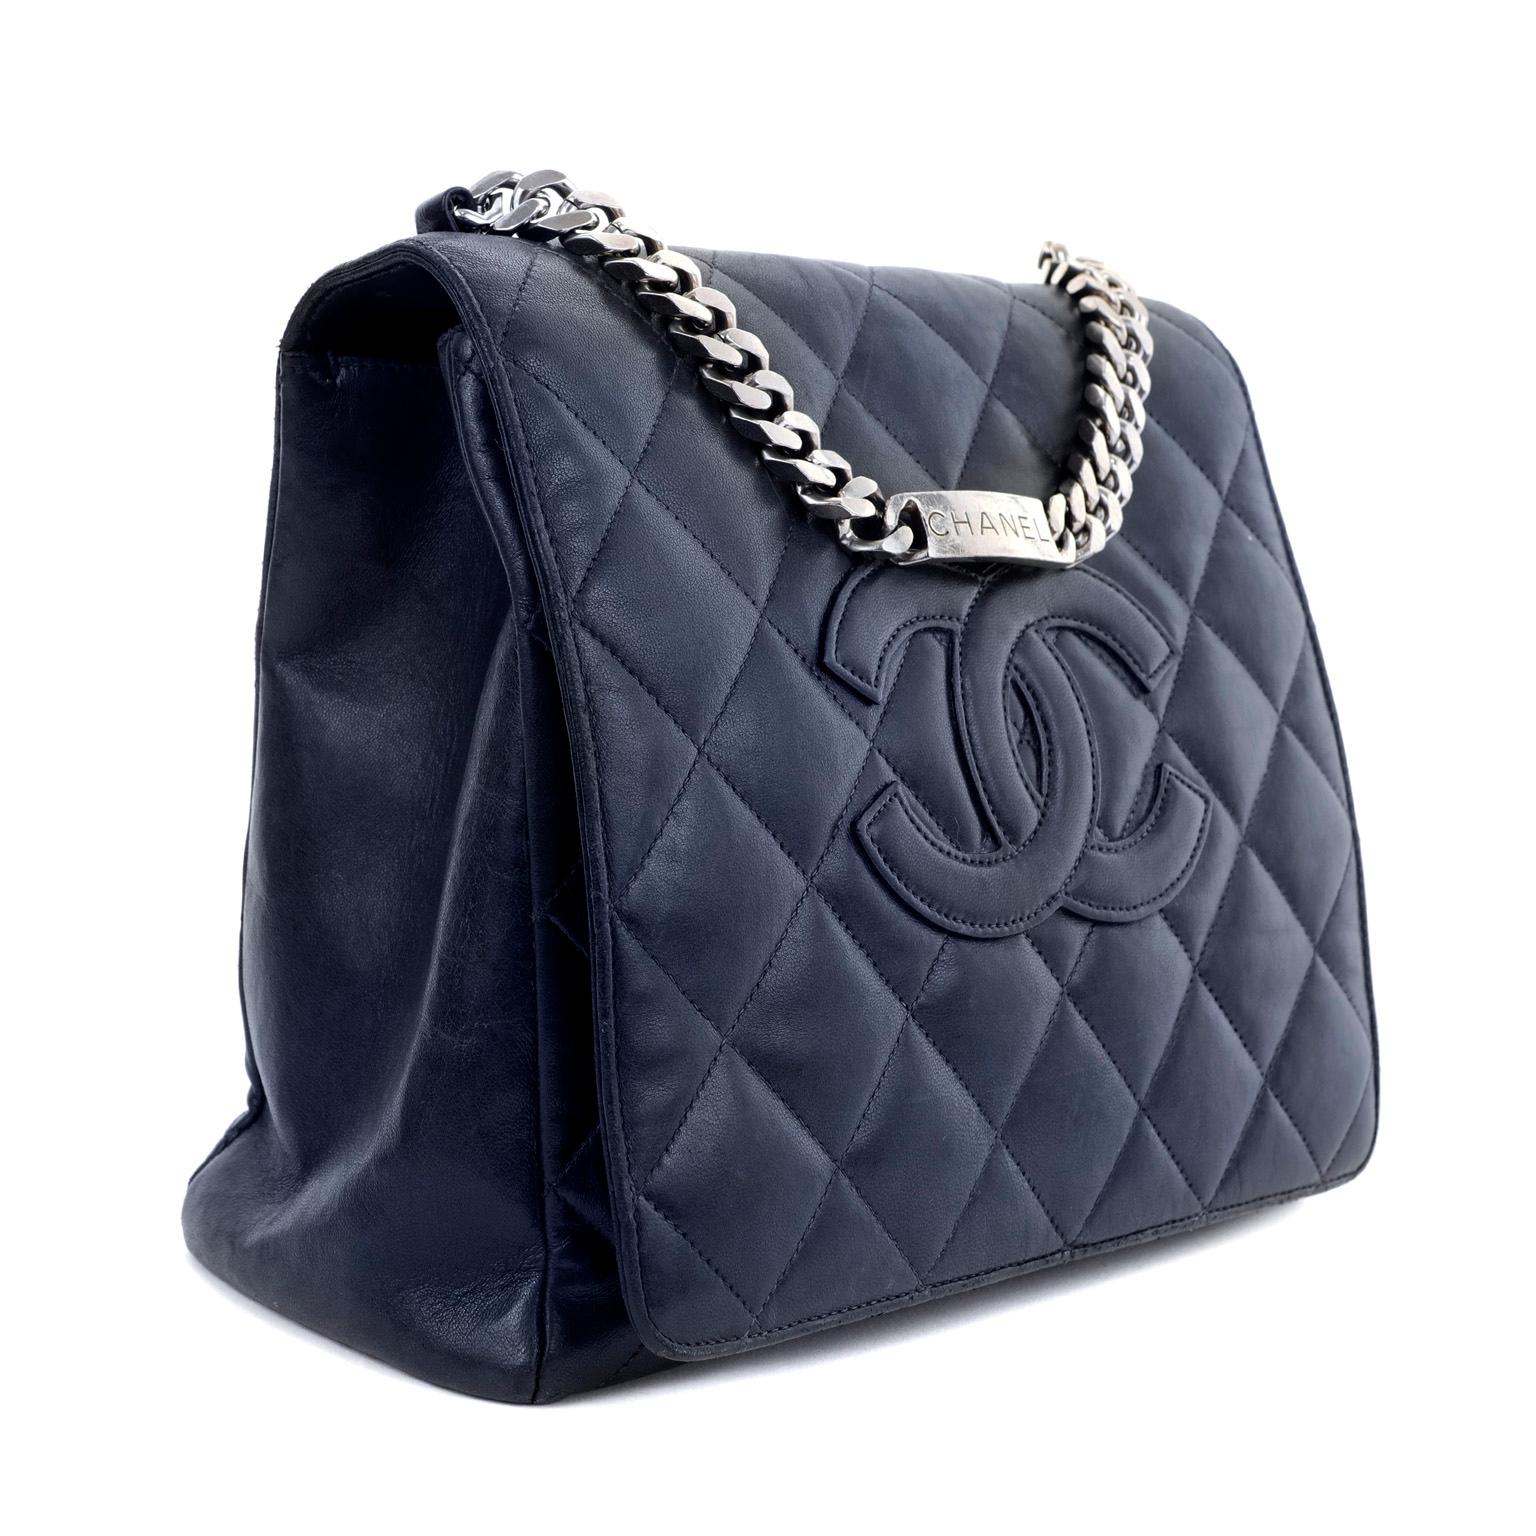 This authentic Chanel Navy Blue Lambskin Top Handle Flap Bag is in very good condition.  Regal navy-blue lambskin is quilted in signature Chanel diamond pattern with large interlocking CC tonally stitched in the center.  Substantial silver tone curb